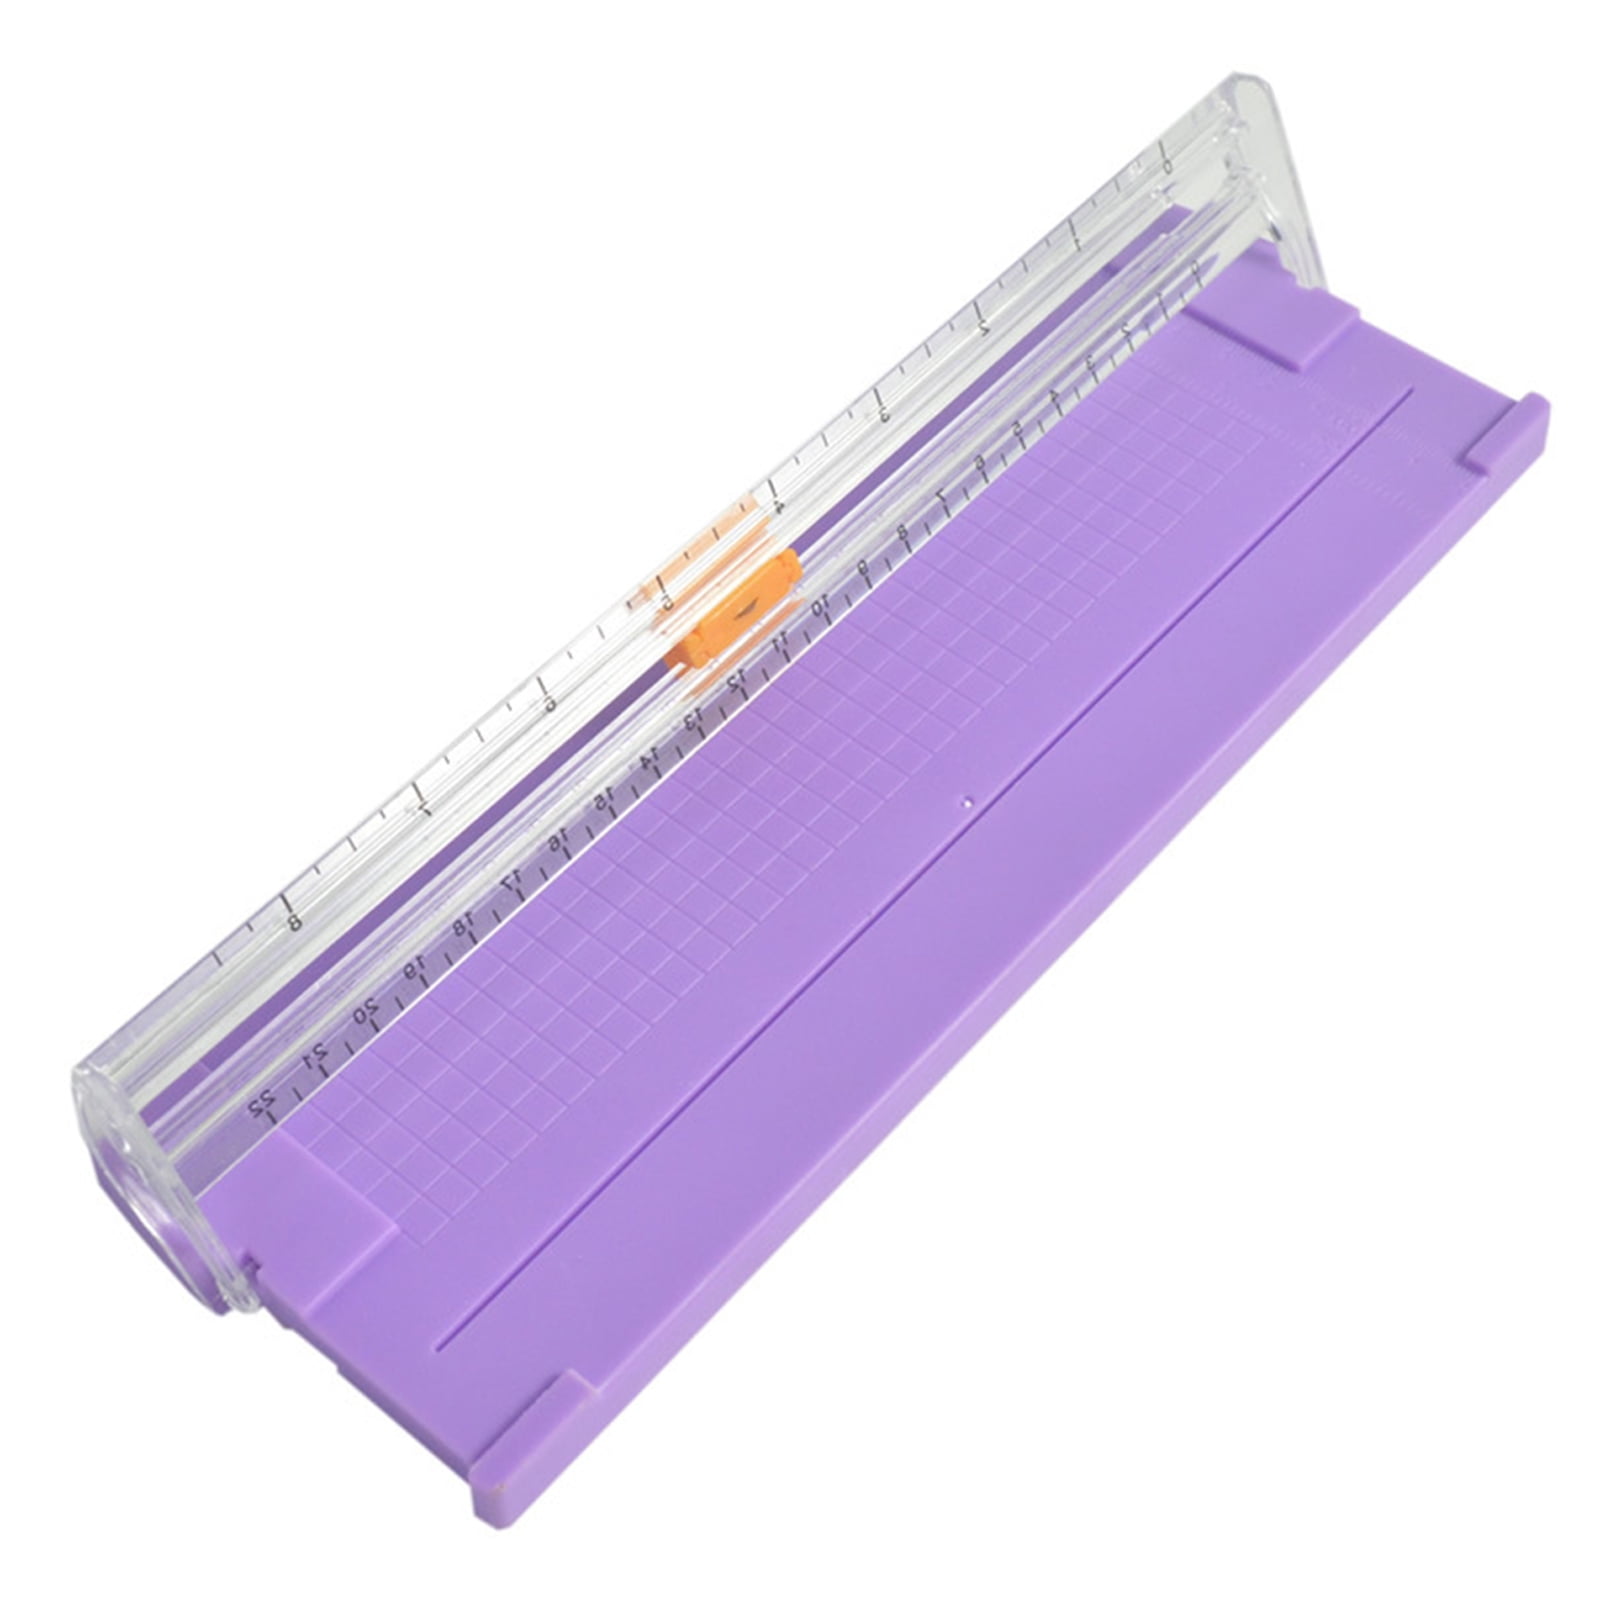 857A5 Paper Cutter Sliding Portable Mini Trimmer with Foldable Ruler for  Craft Purple ABS Metal